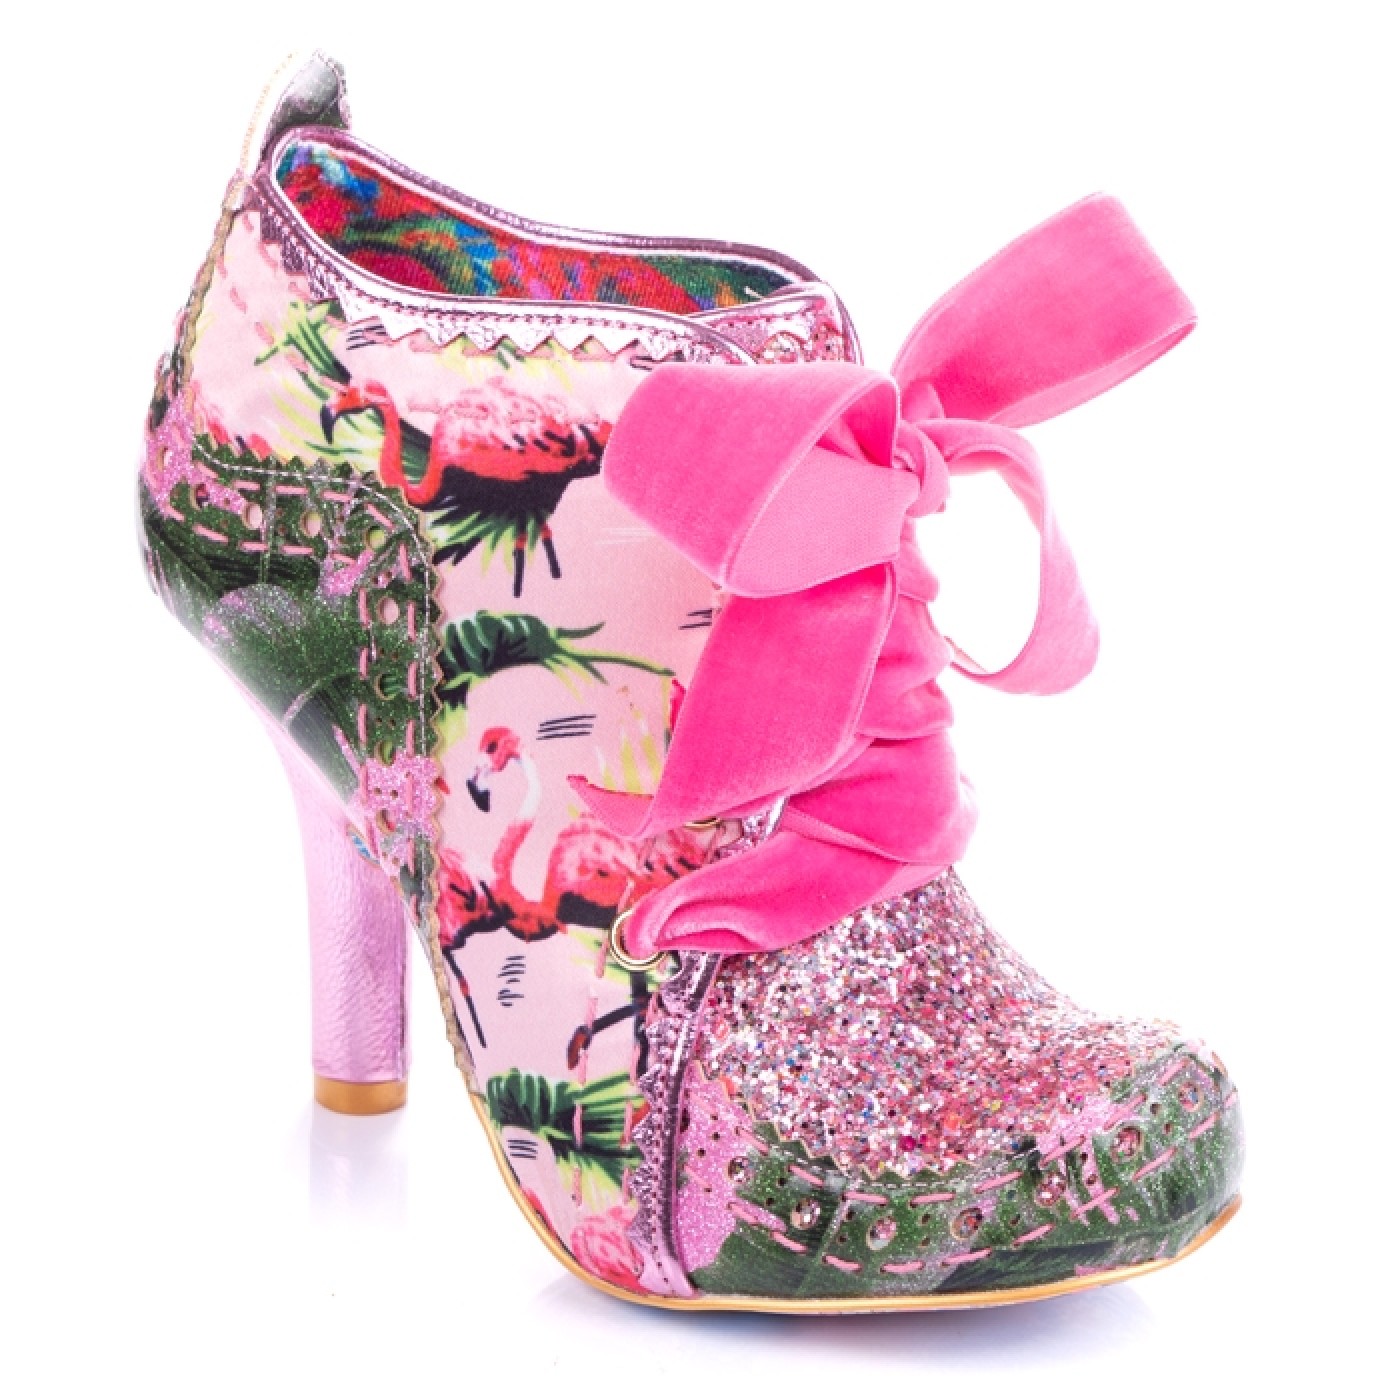 Abigails 3rd Party (pink)